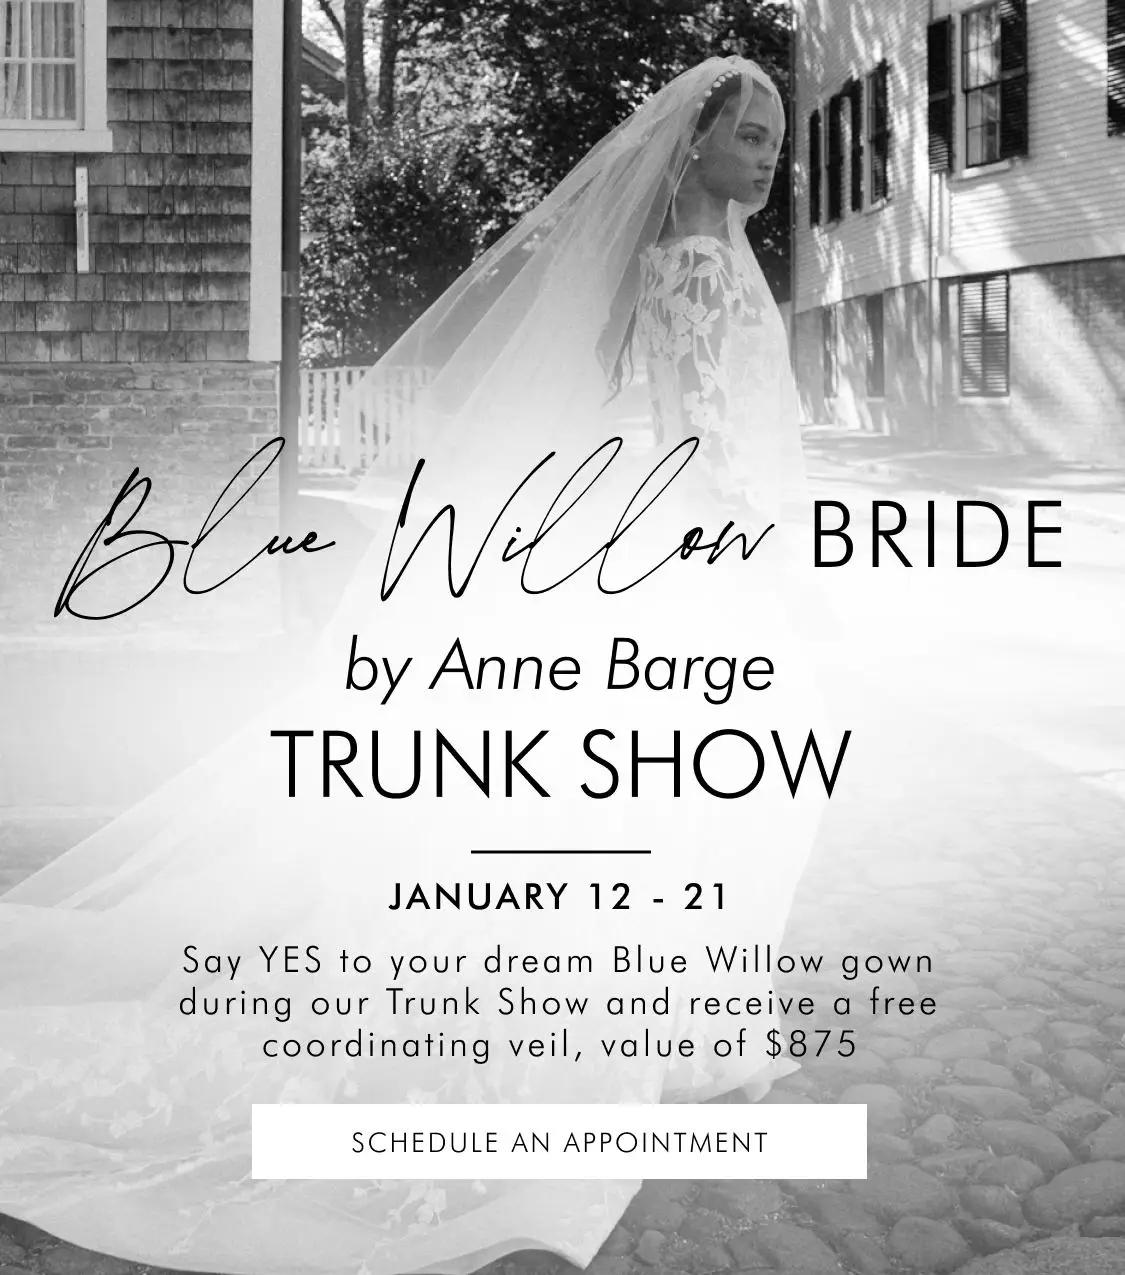 Blue Willow by Anne Barge Trunk Show at Madeleine's Daughter